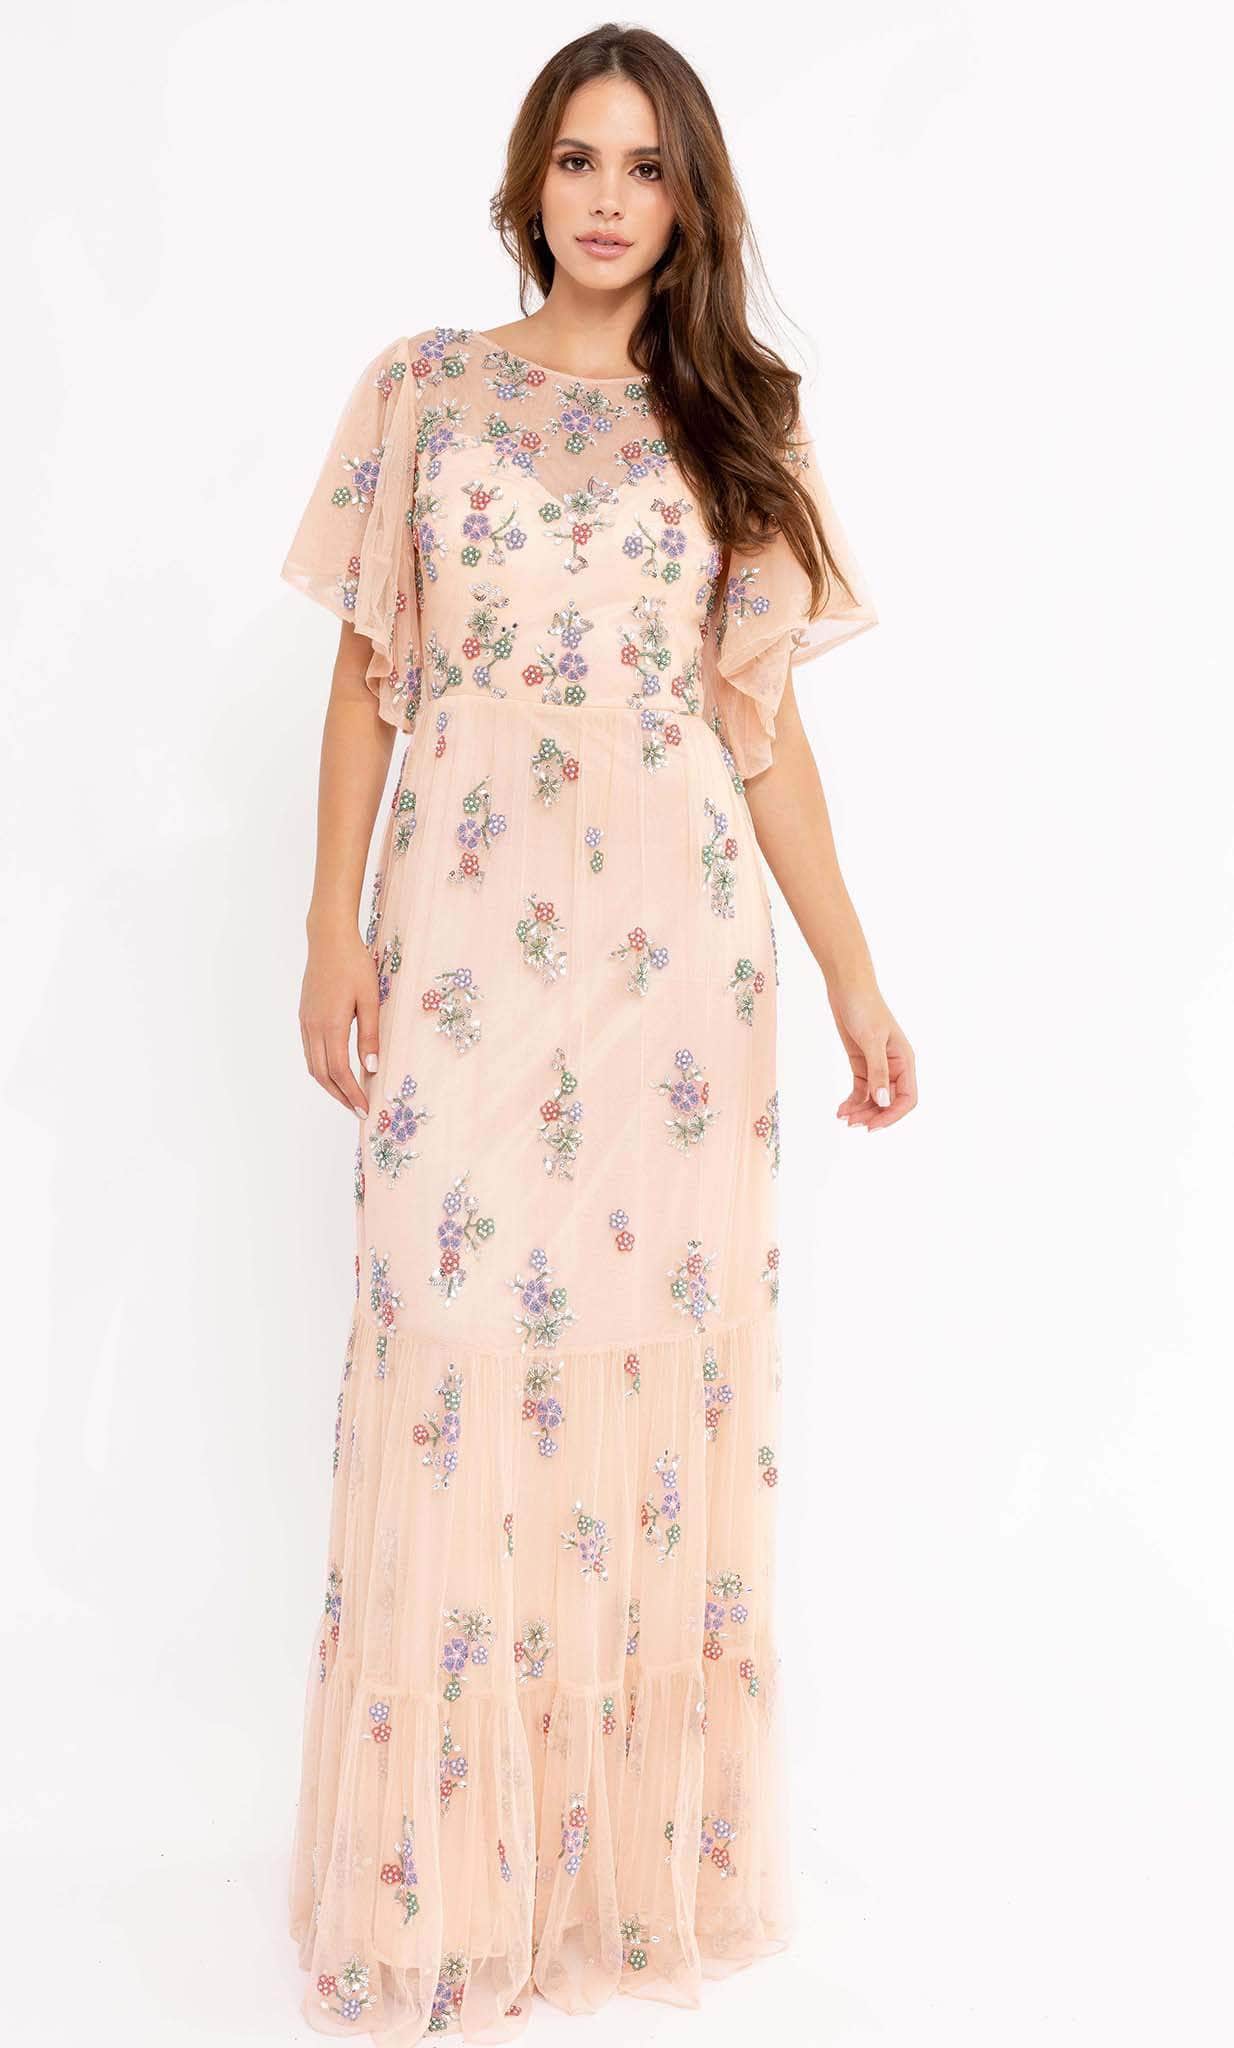 Image of Primavera Couture 13108 - Soft-Looking Floral Long Dress